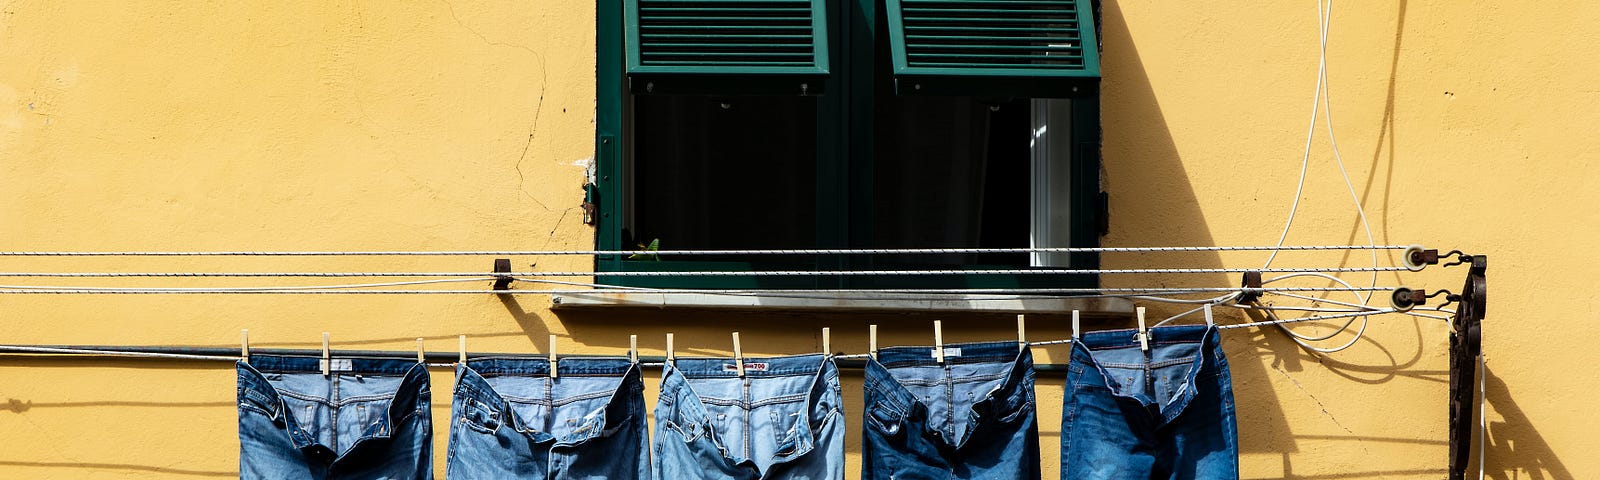 A row of denim jeans hanging to dry under a window and against a yellow wall.